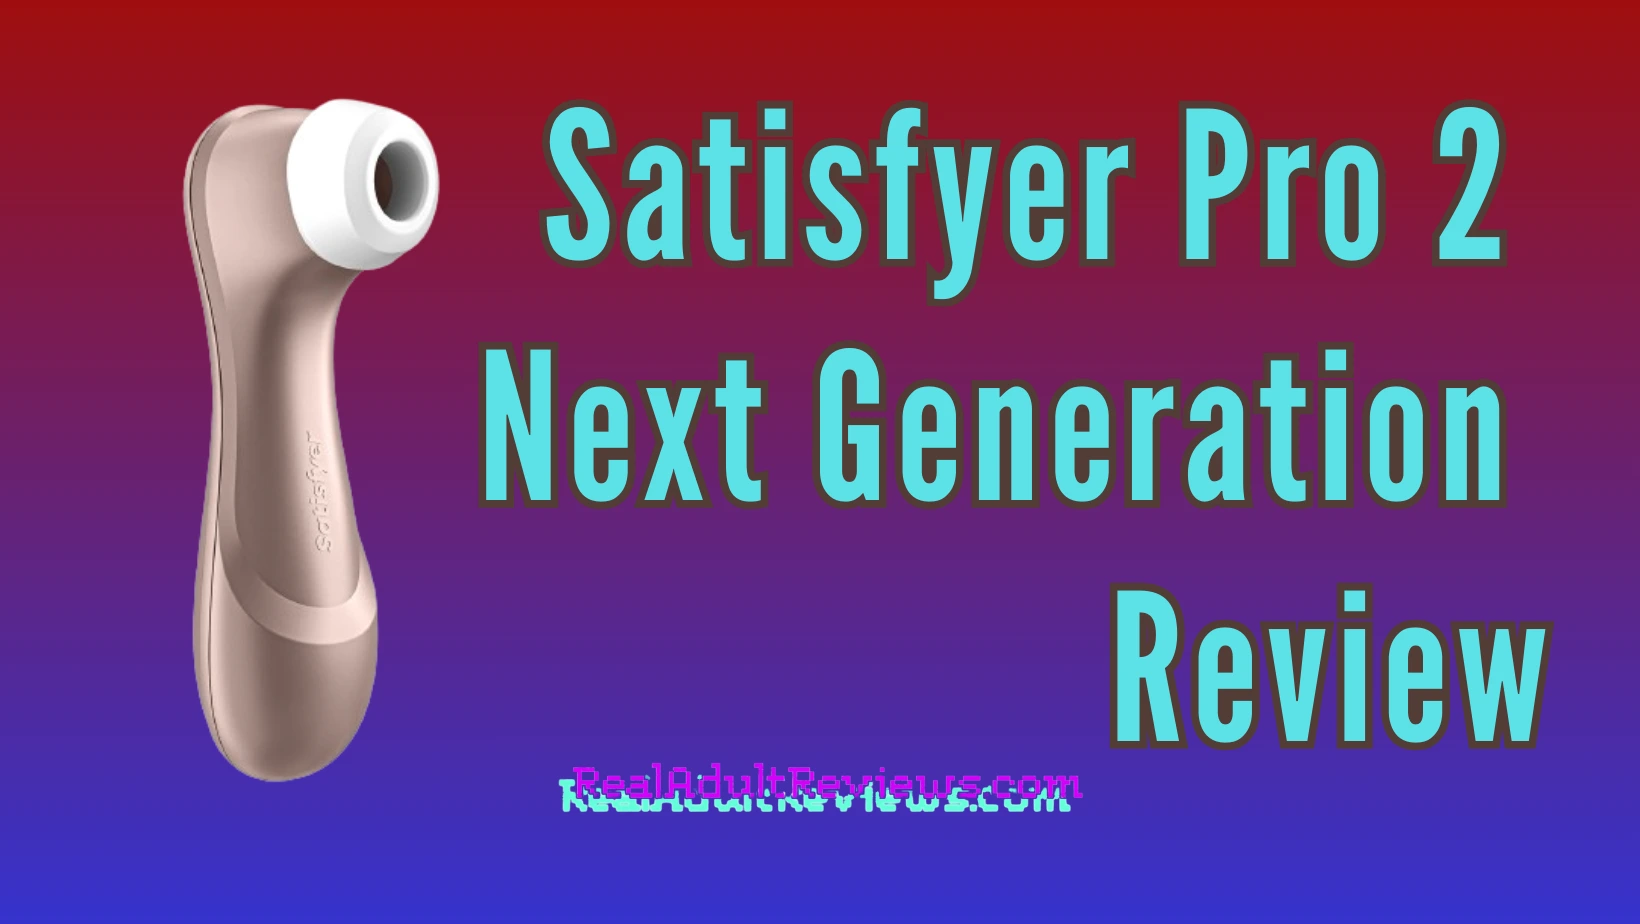 Satisfyer Pro 2 Next Generation Clitoral Vibrator Review: What Has Improved?